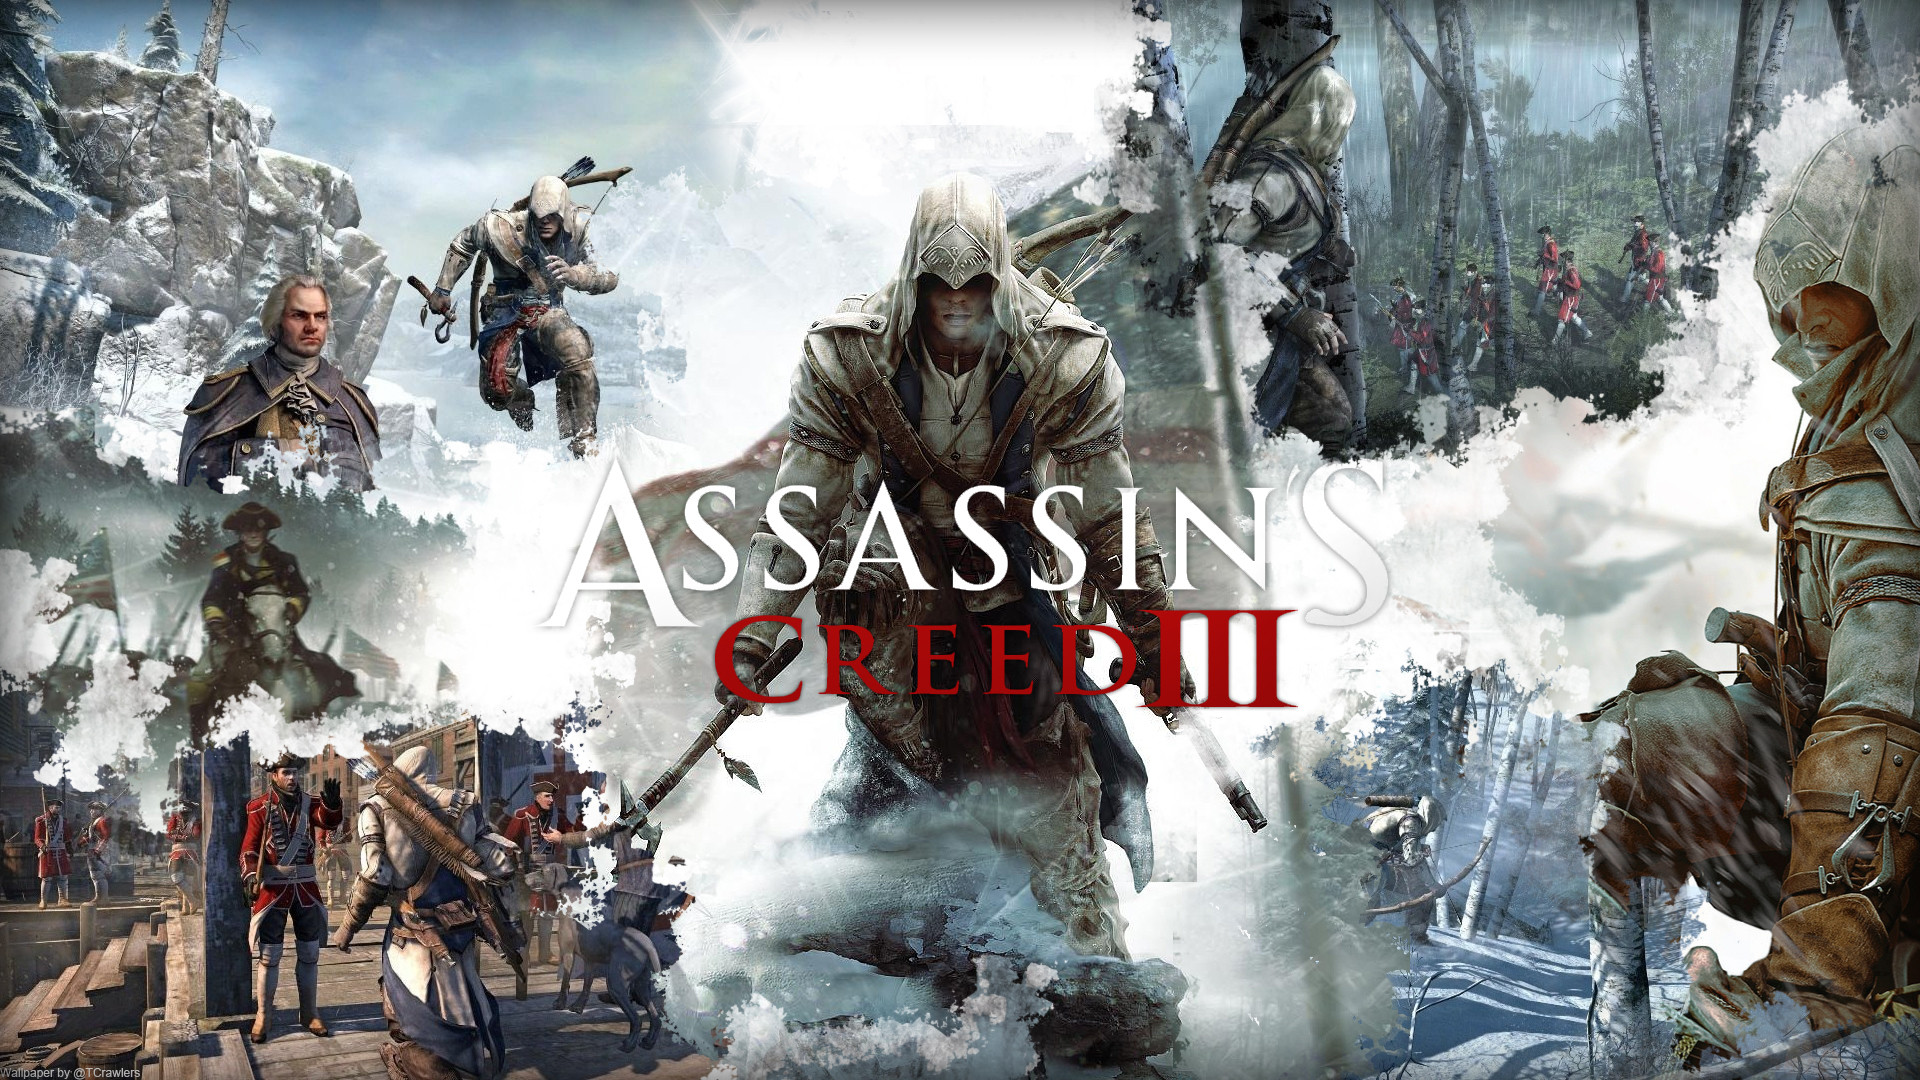 Assassins Creed 3 Free Download belongs to one of the most famous and popular game series